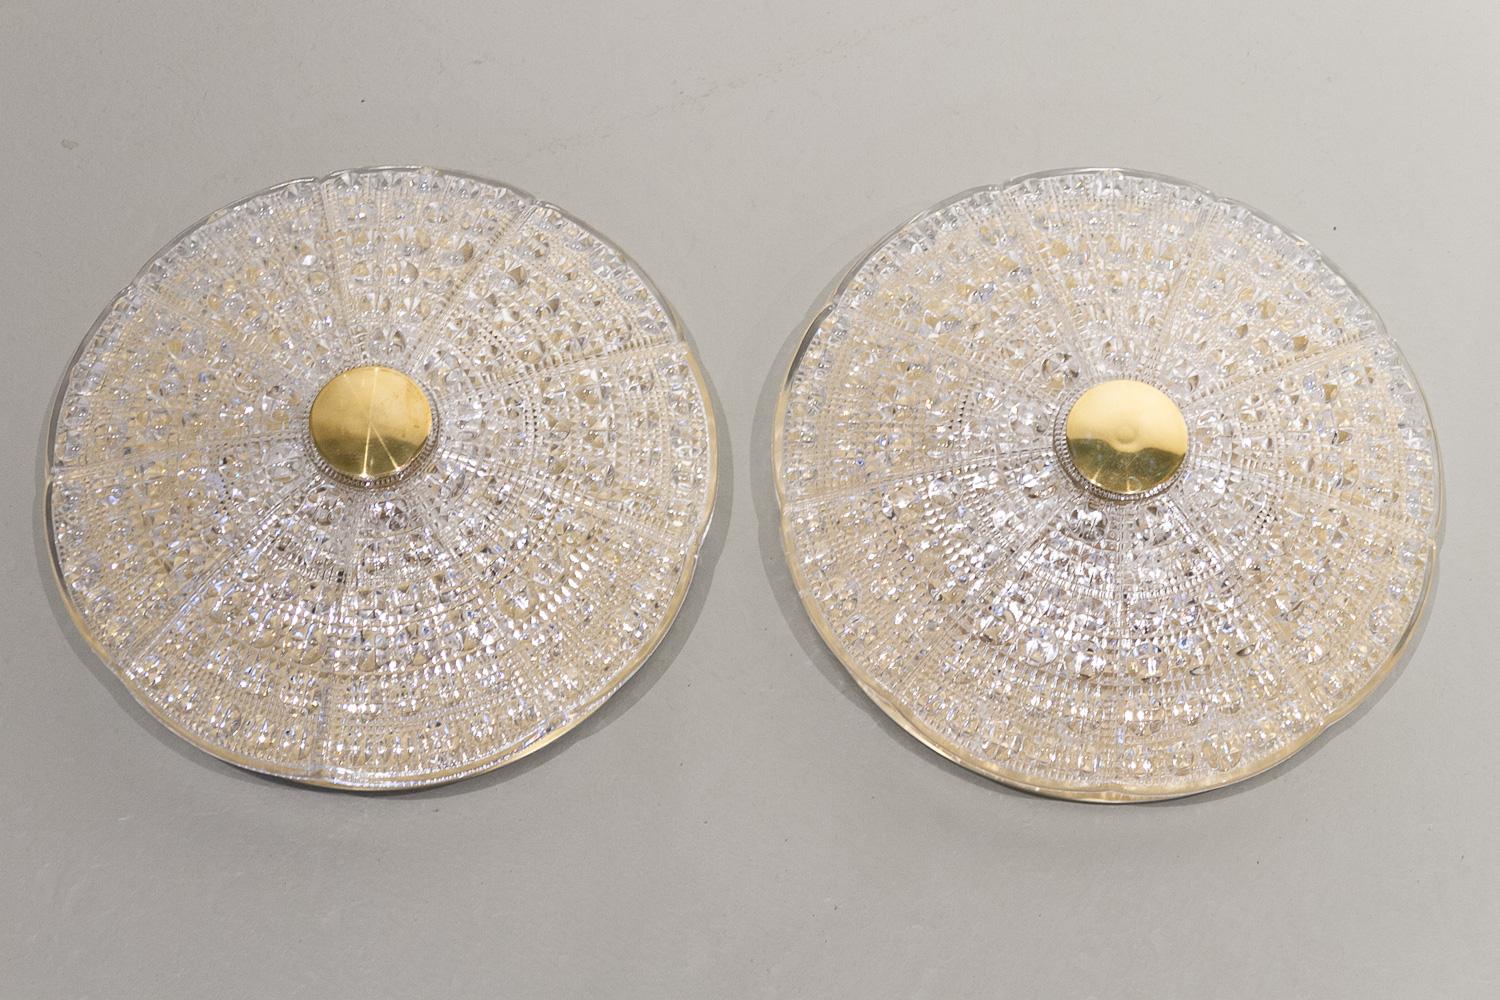 Scandinavian Modern Vintage Crystal Flush Mounted Ceiling Lamps by Carl Fagerlund, 1960s. Set of 2. For Sale